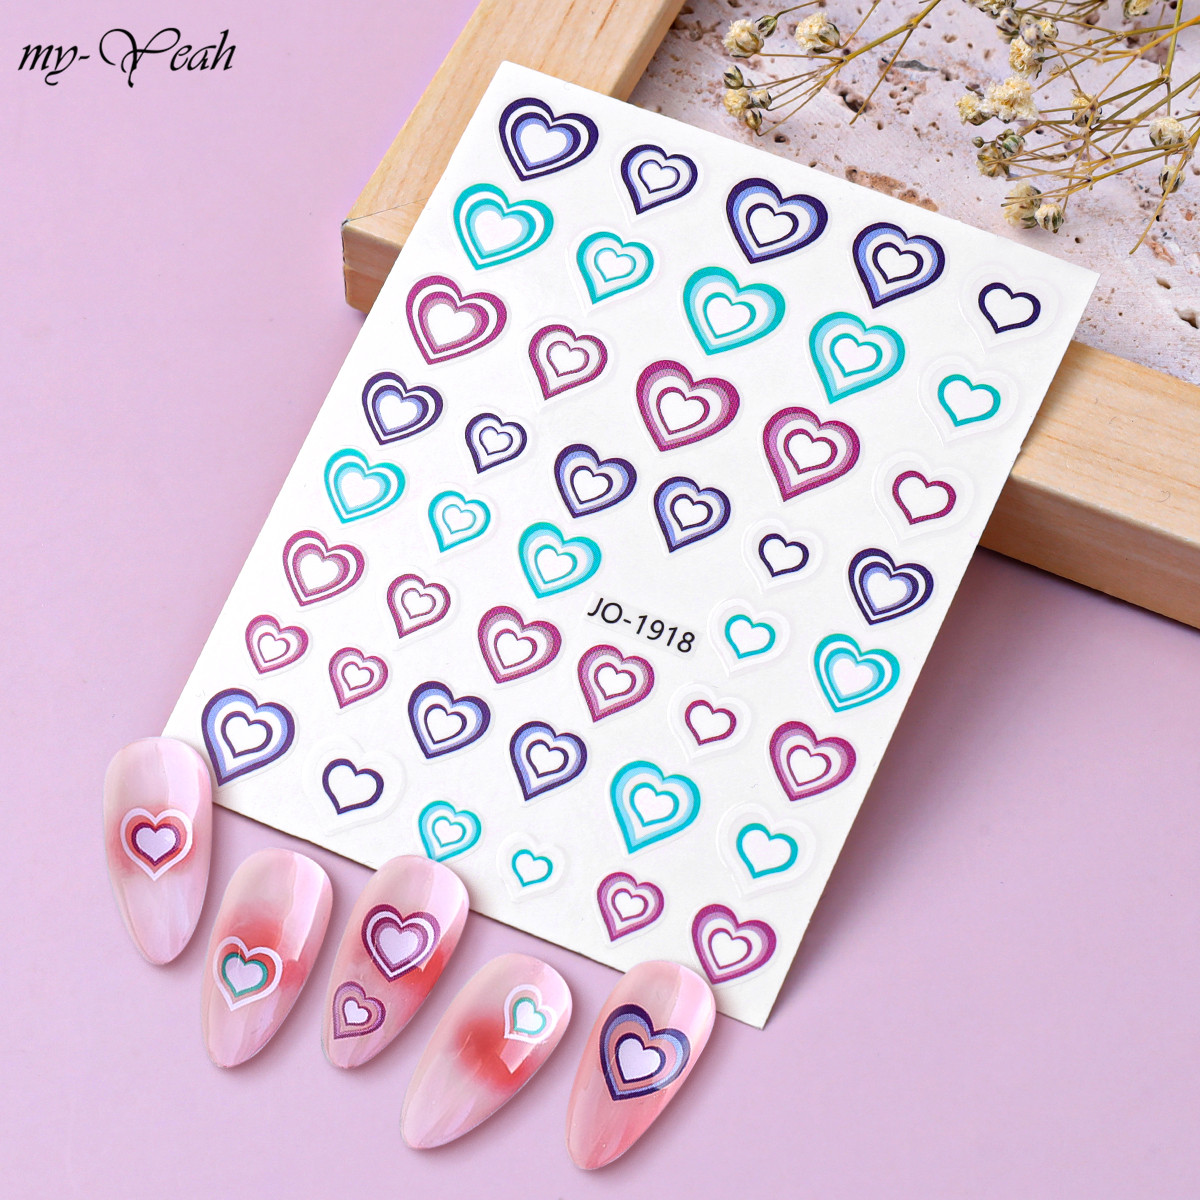 myyeah Gradient Love Heart Nail Sticker French Tip Blooming Colourful Love Heart Self-Keo Nail Decal Trang trí móng tay